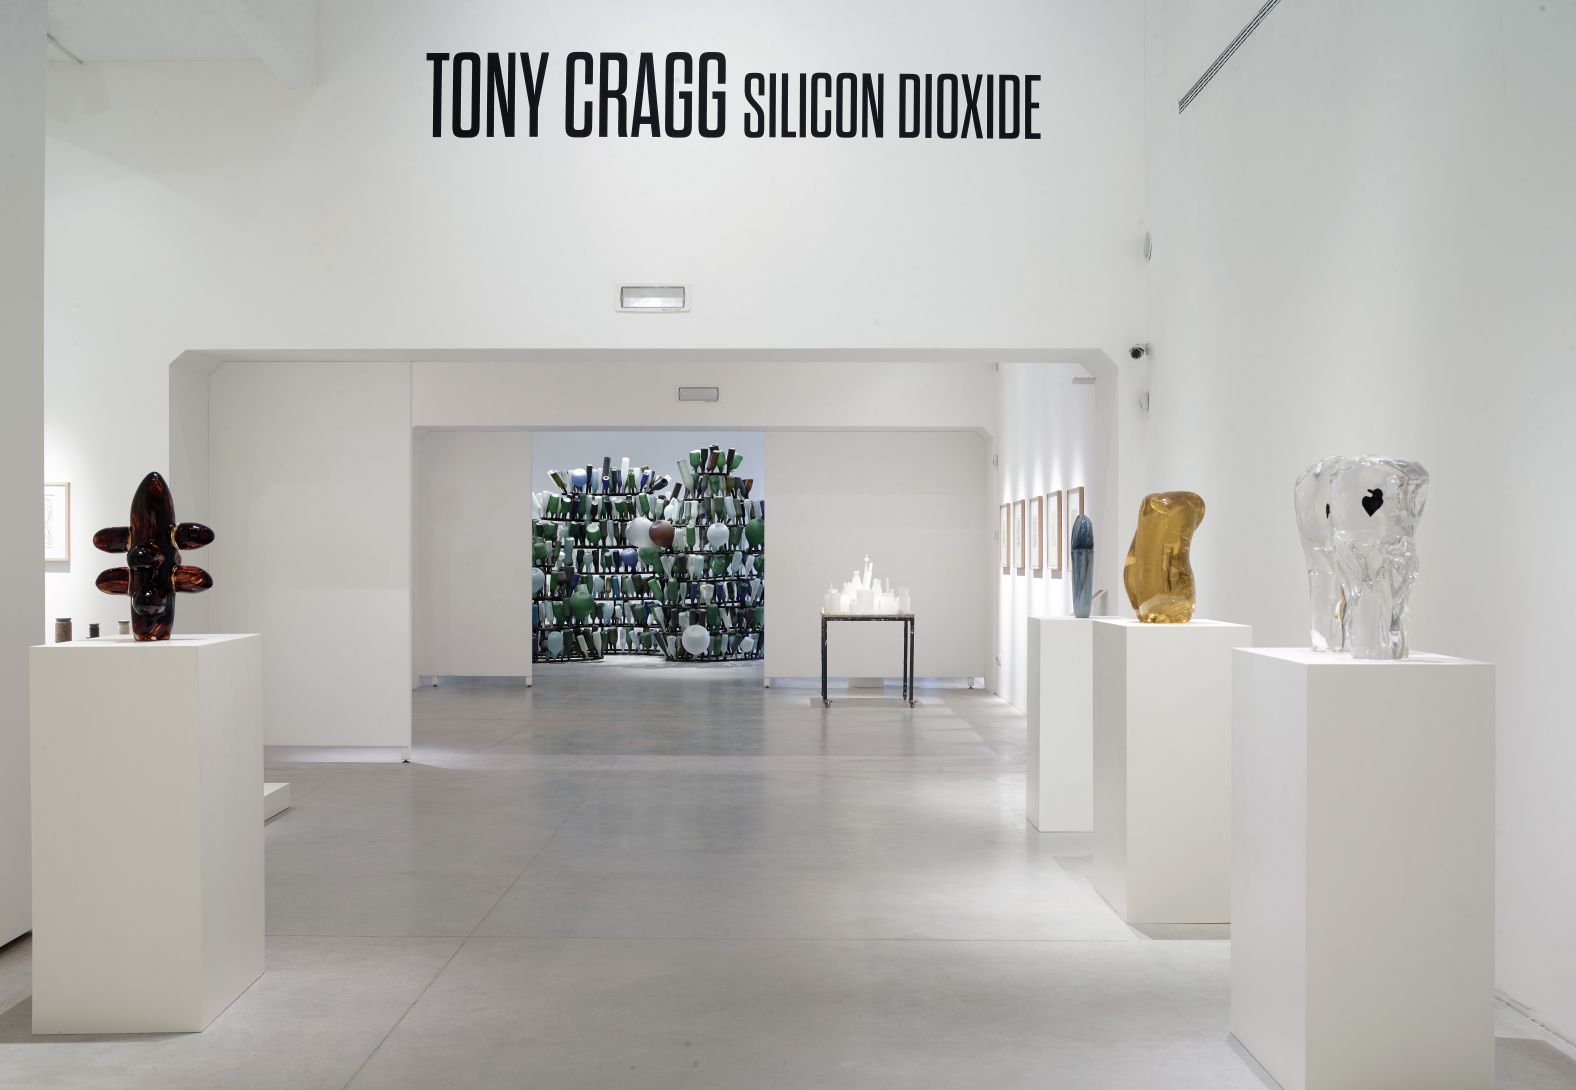 Tony Cragg "Silicon Dioxide" in Venice, Italy, from 03 December to 13 March